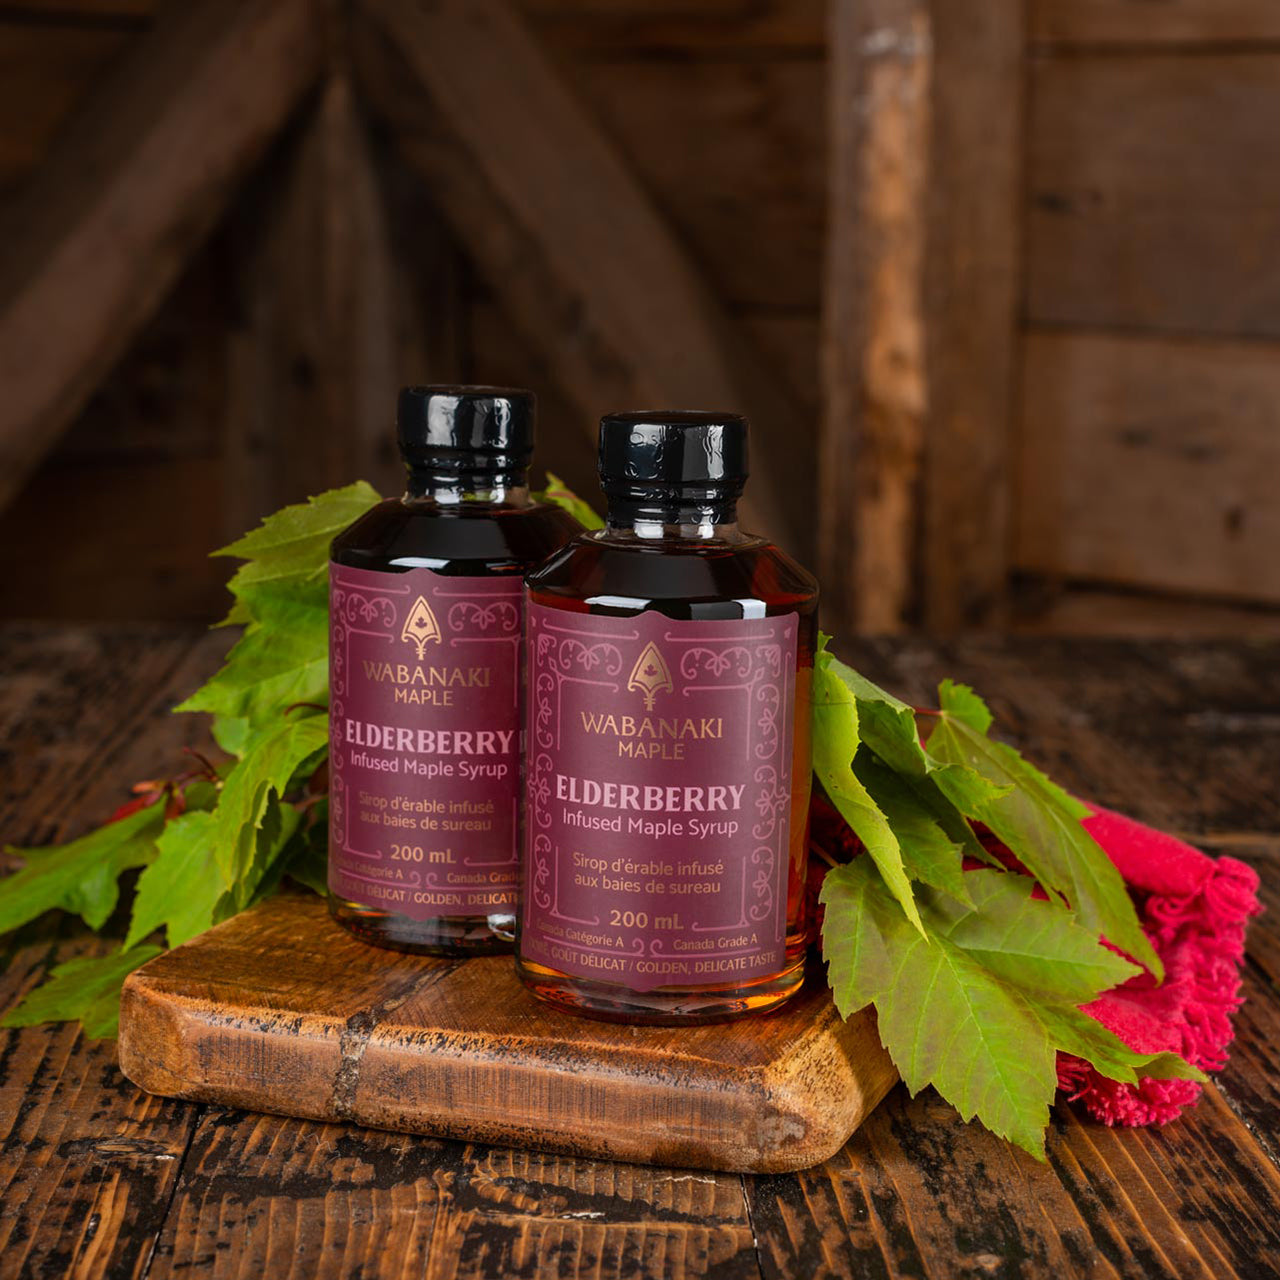 Elderberry Infused Maple Syrup. Our 100% Indigenous maple syrup has gone to its roots and traditional food source with Elderberry and Maple Syrup. Elderberries were knows for it's medicinal use and tartness and this infusion brings that taste to it.